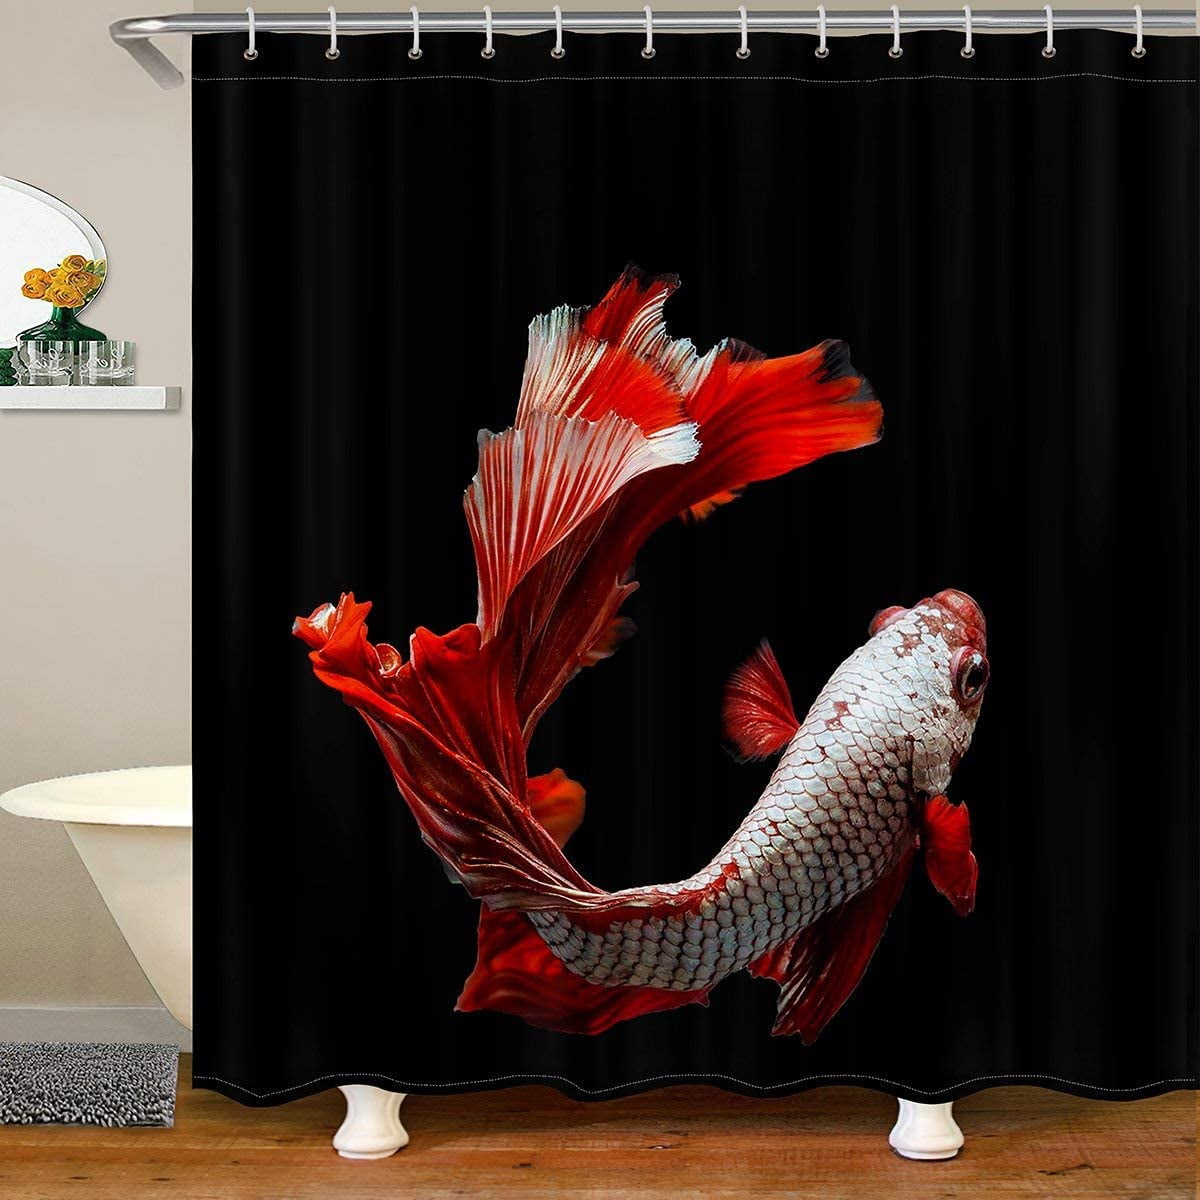 Ambesonne Fish Shower Curtain, Koi Shoal Chinese Animal, 69Wx70L